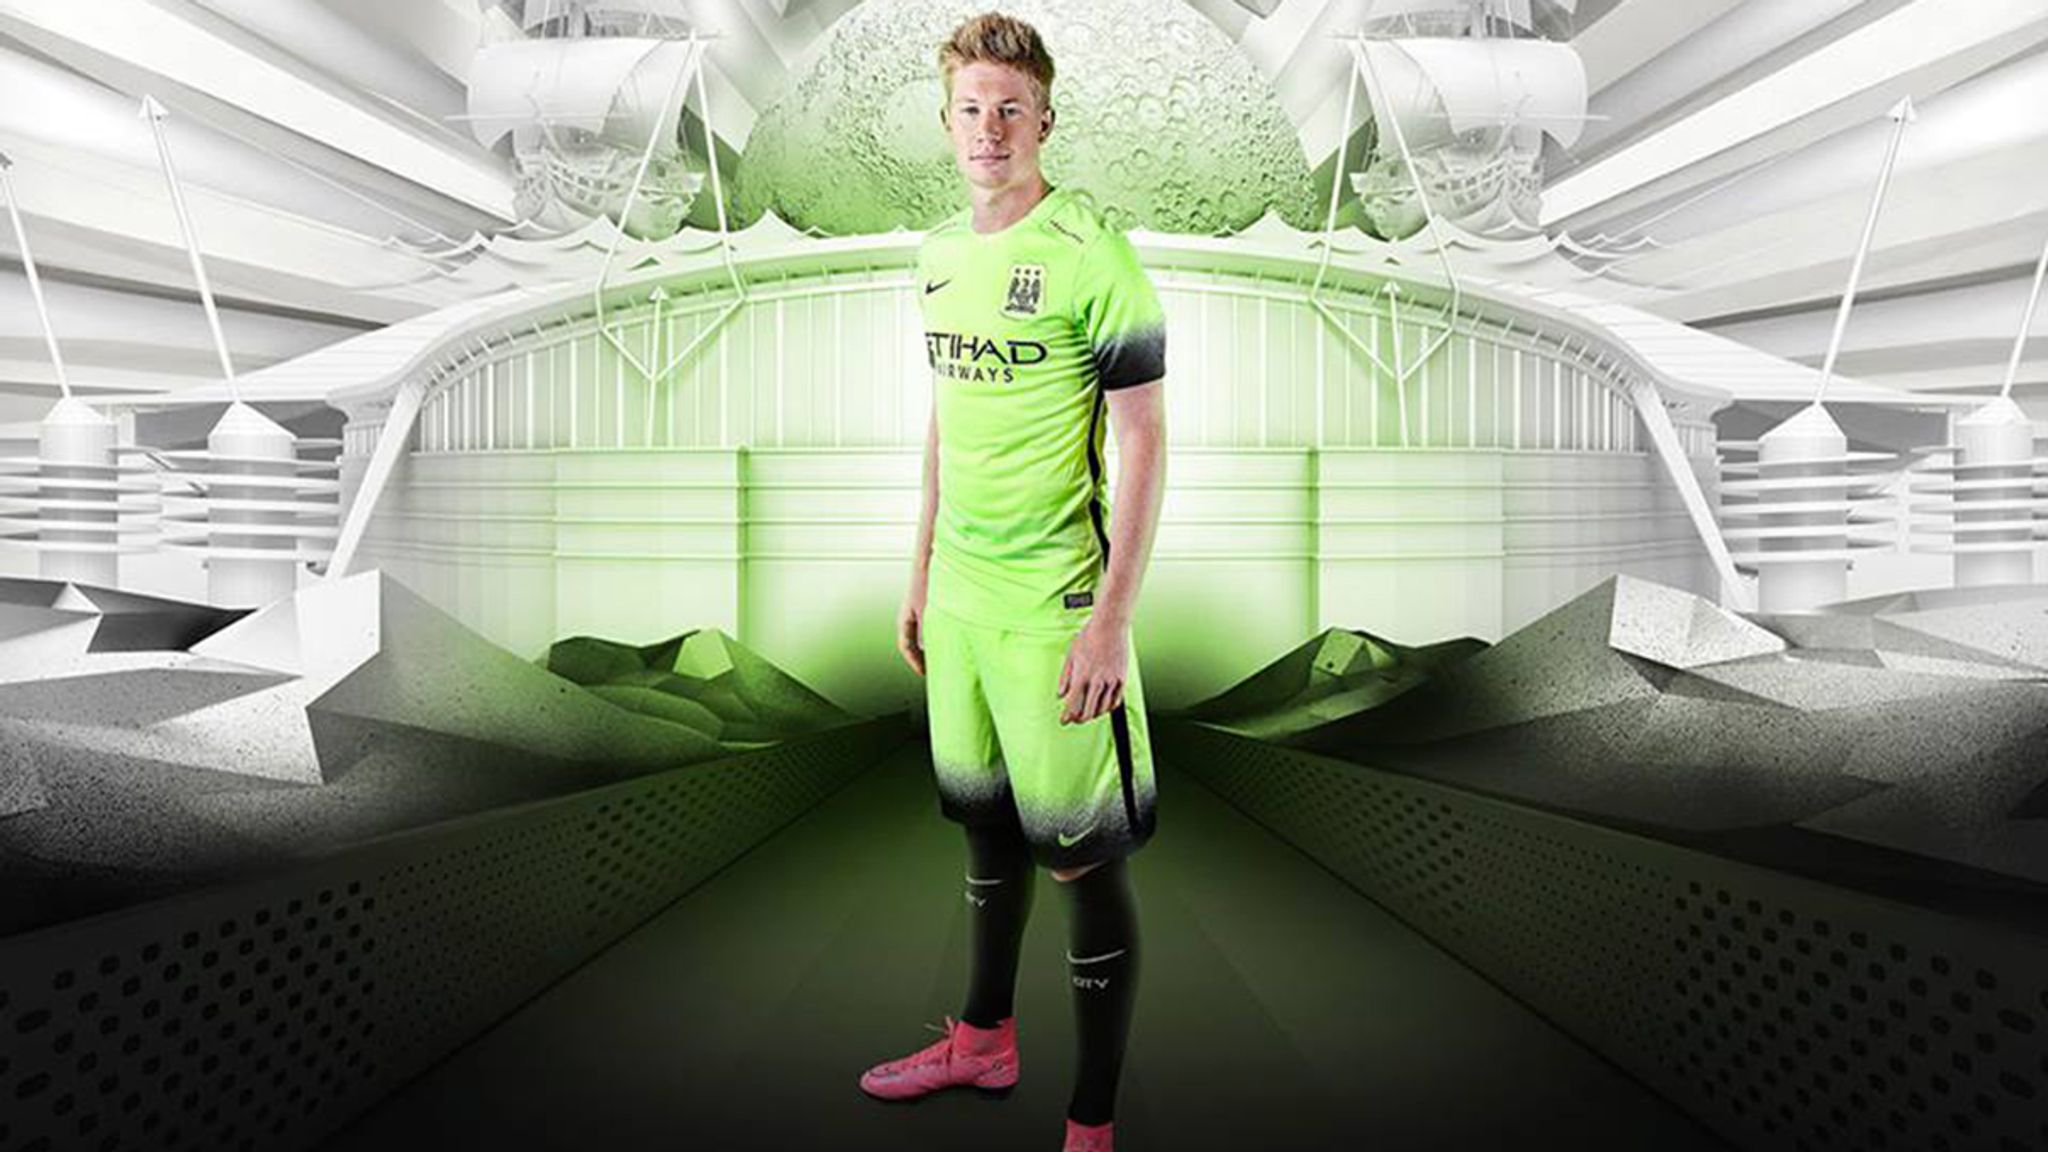 Celtic's New Third Kit Is Bright Pink - SPORTbible